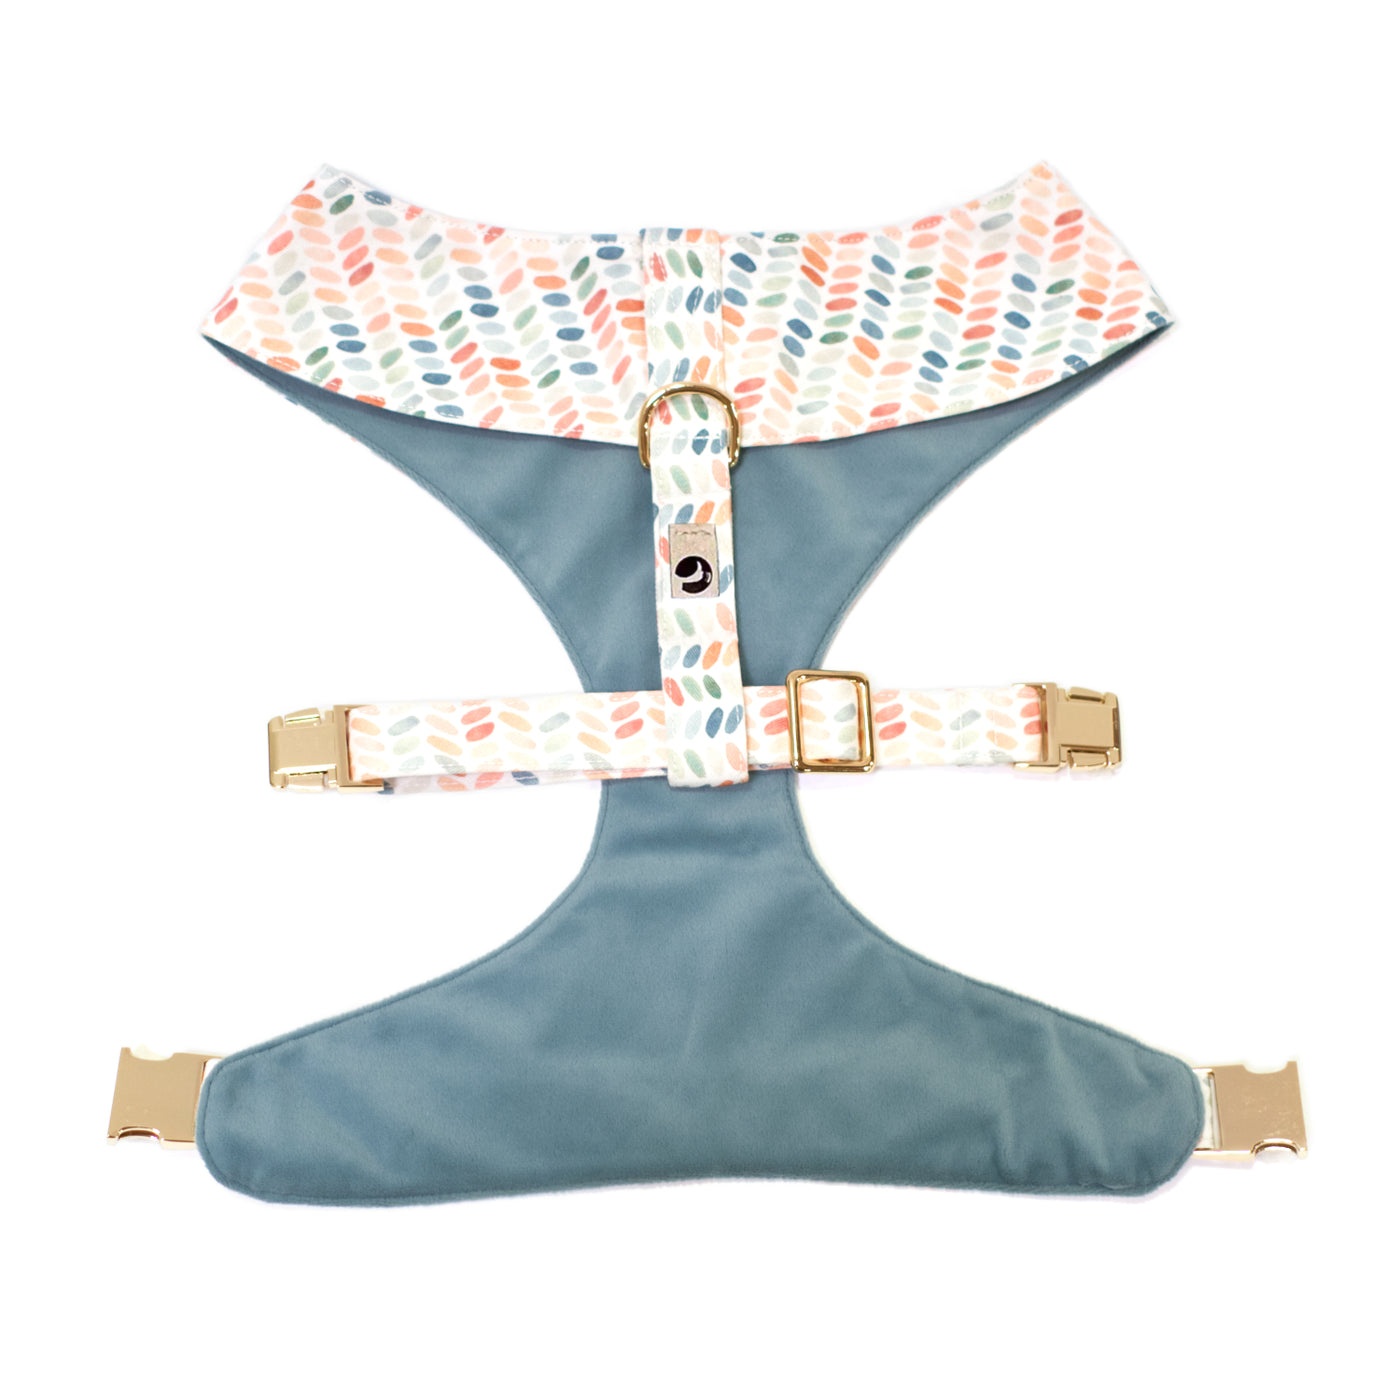 Reversible dog harness in modern dot print shown from back/top.